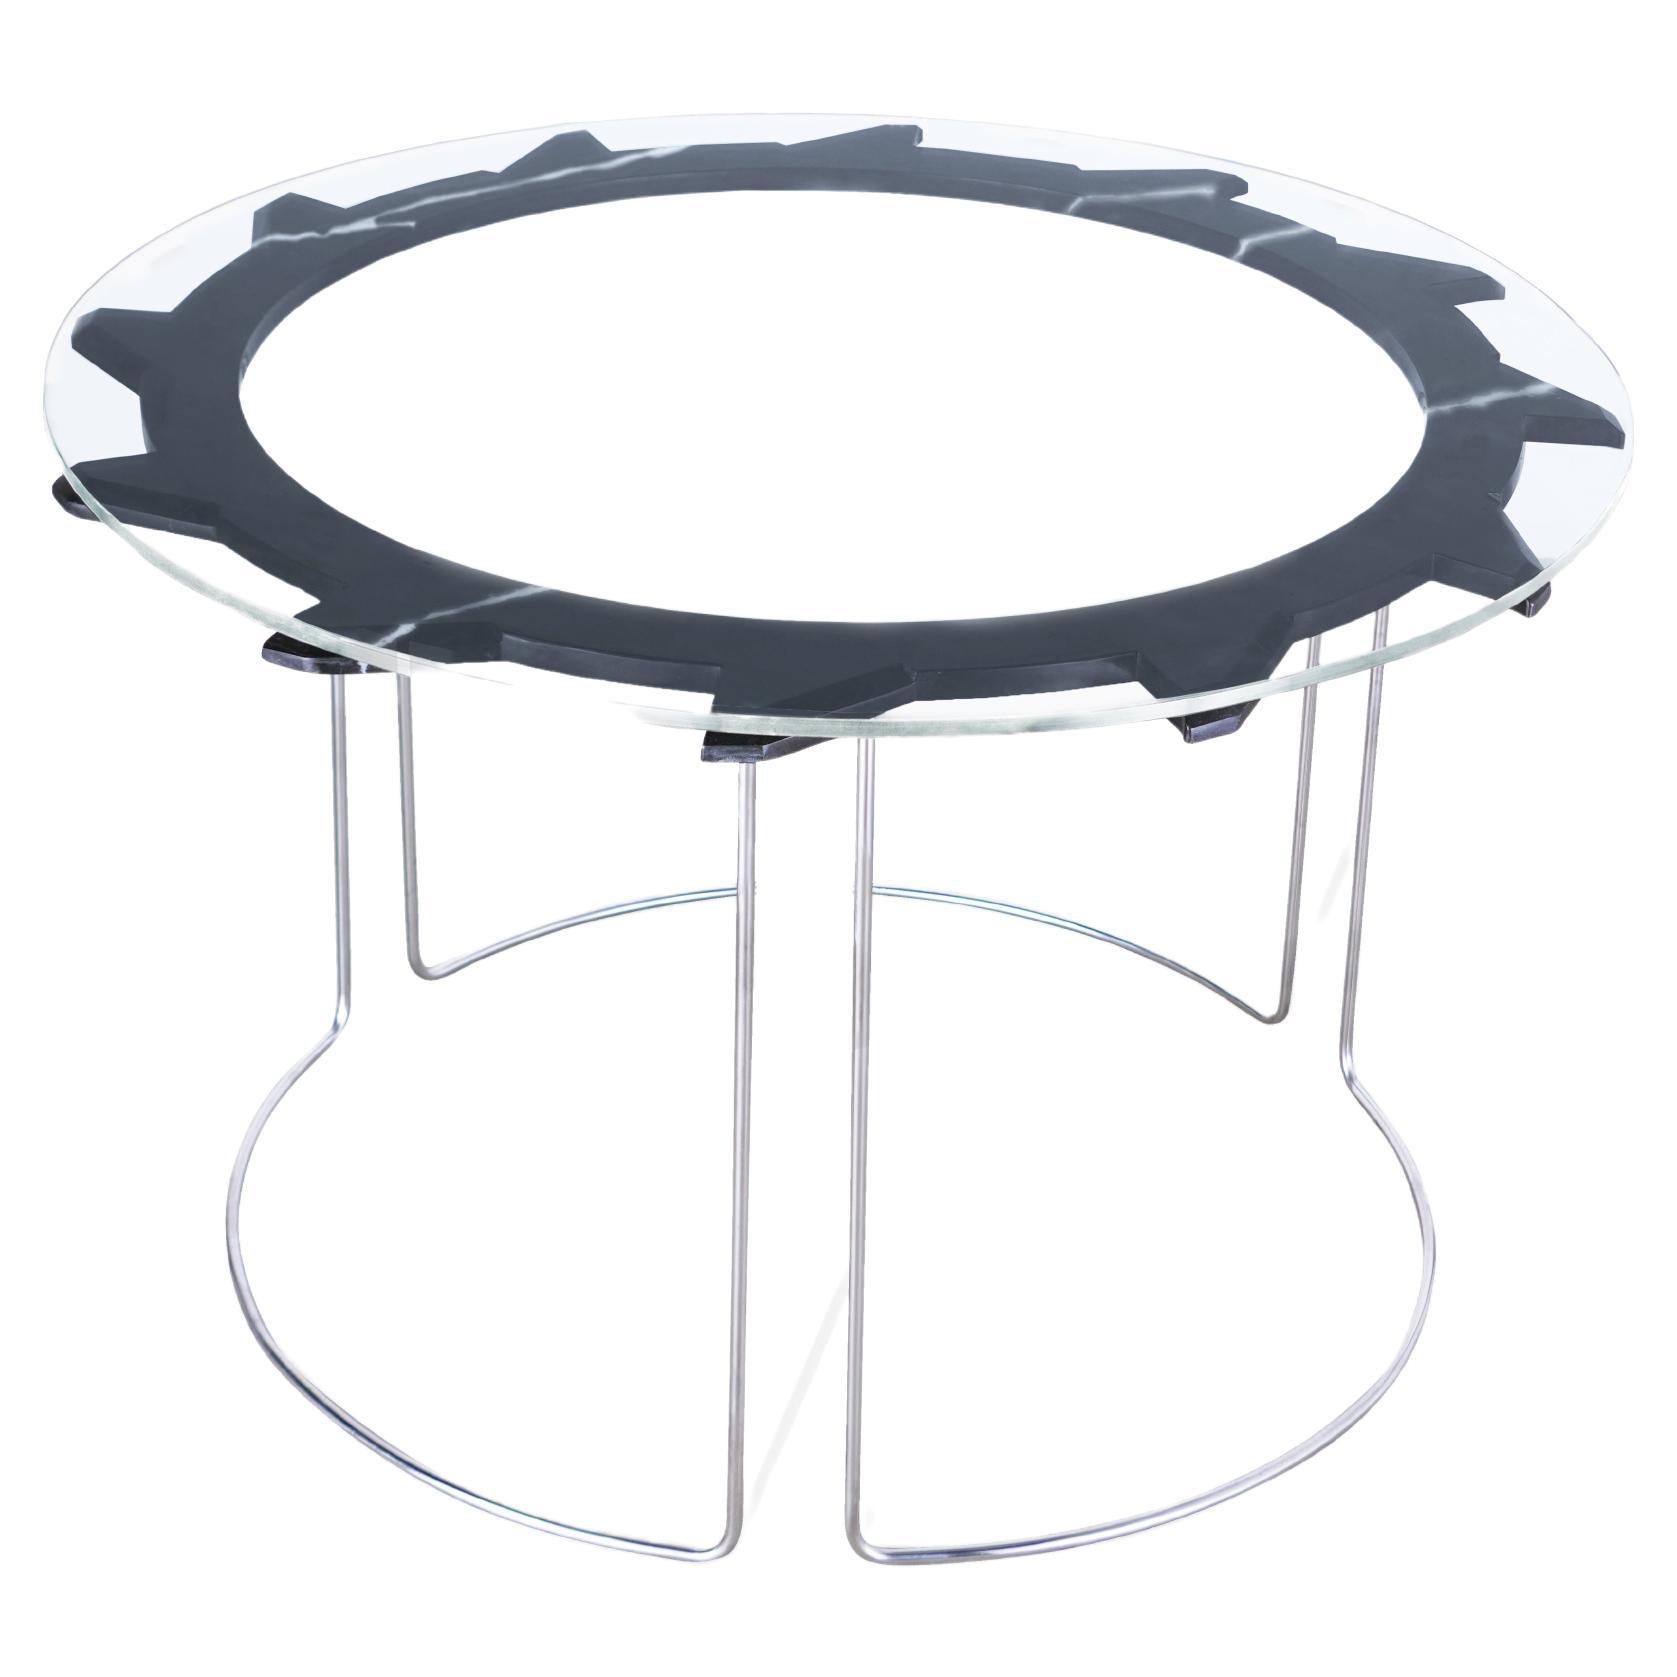 Buzzsaw Dining Table – Black For Sale